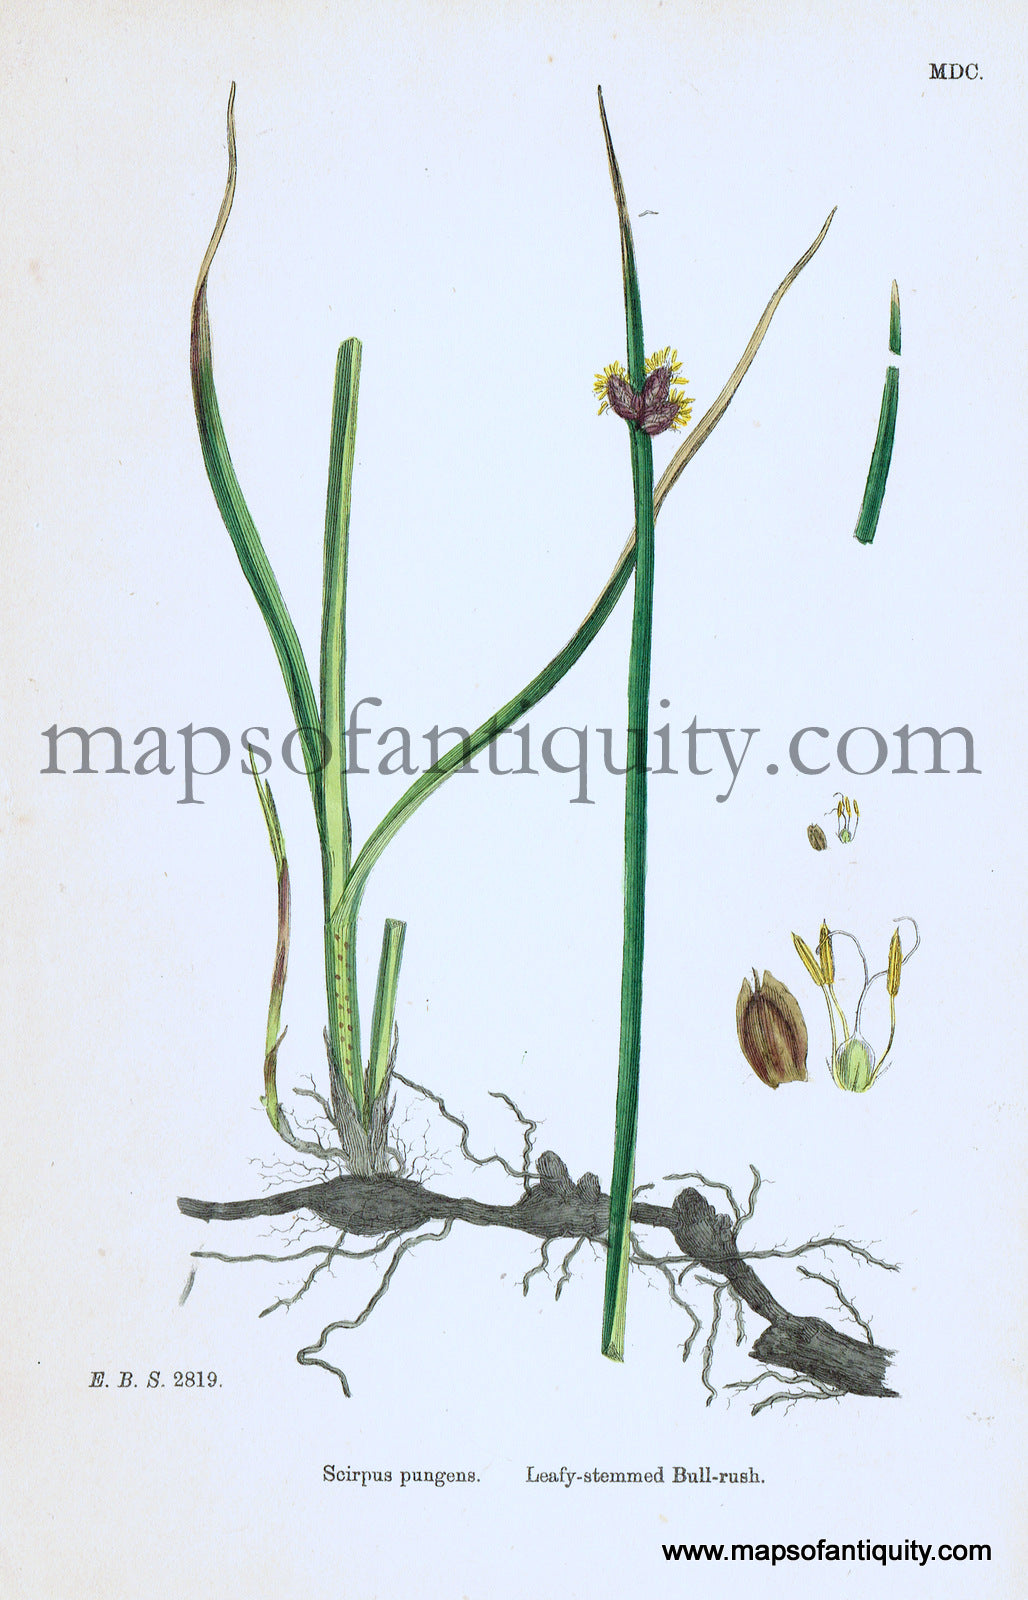 Antique-Hand-Colored-Print-Scirpus-pungens-Antique-Prints-Natural-History-Botanical-c.-1860-Sowerby-Maps-Of-Antiquity